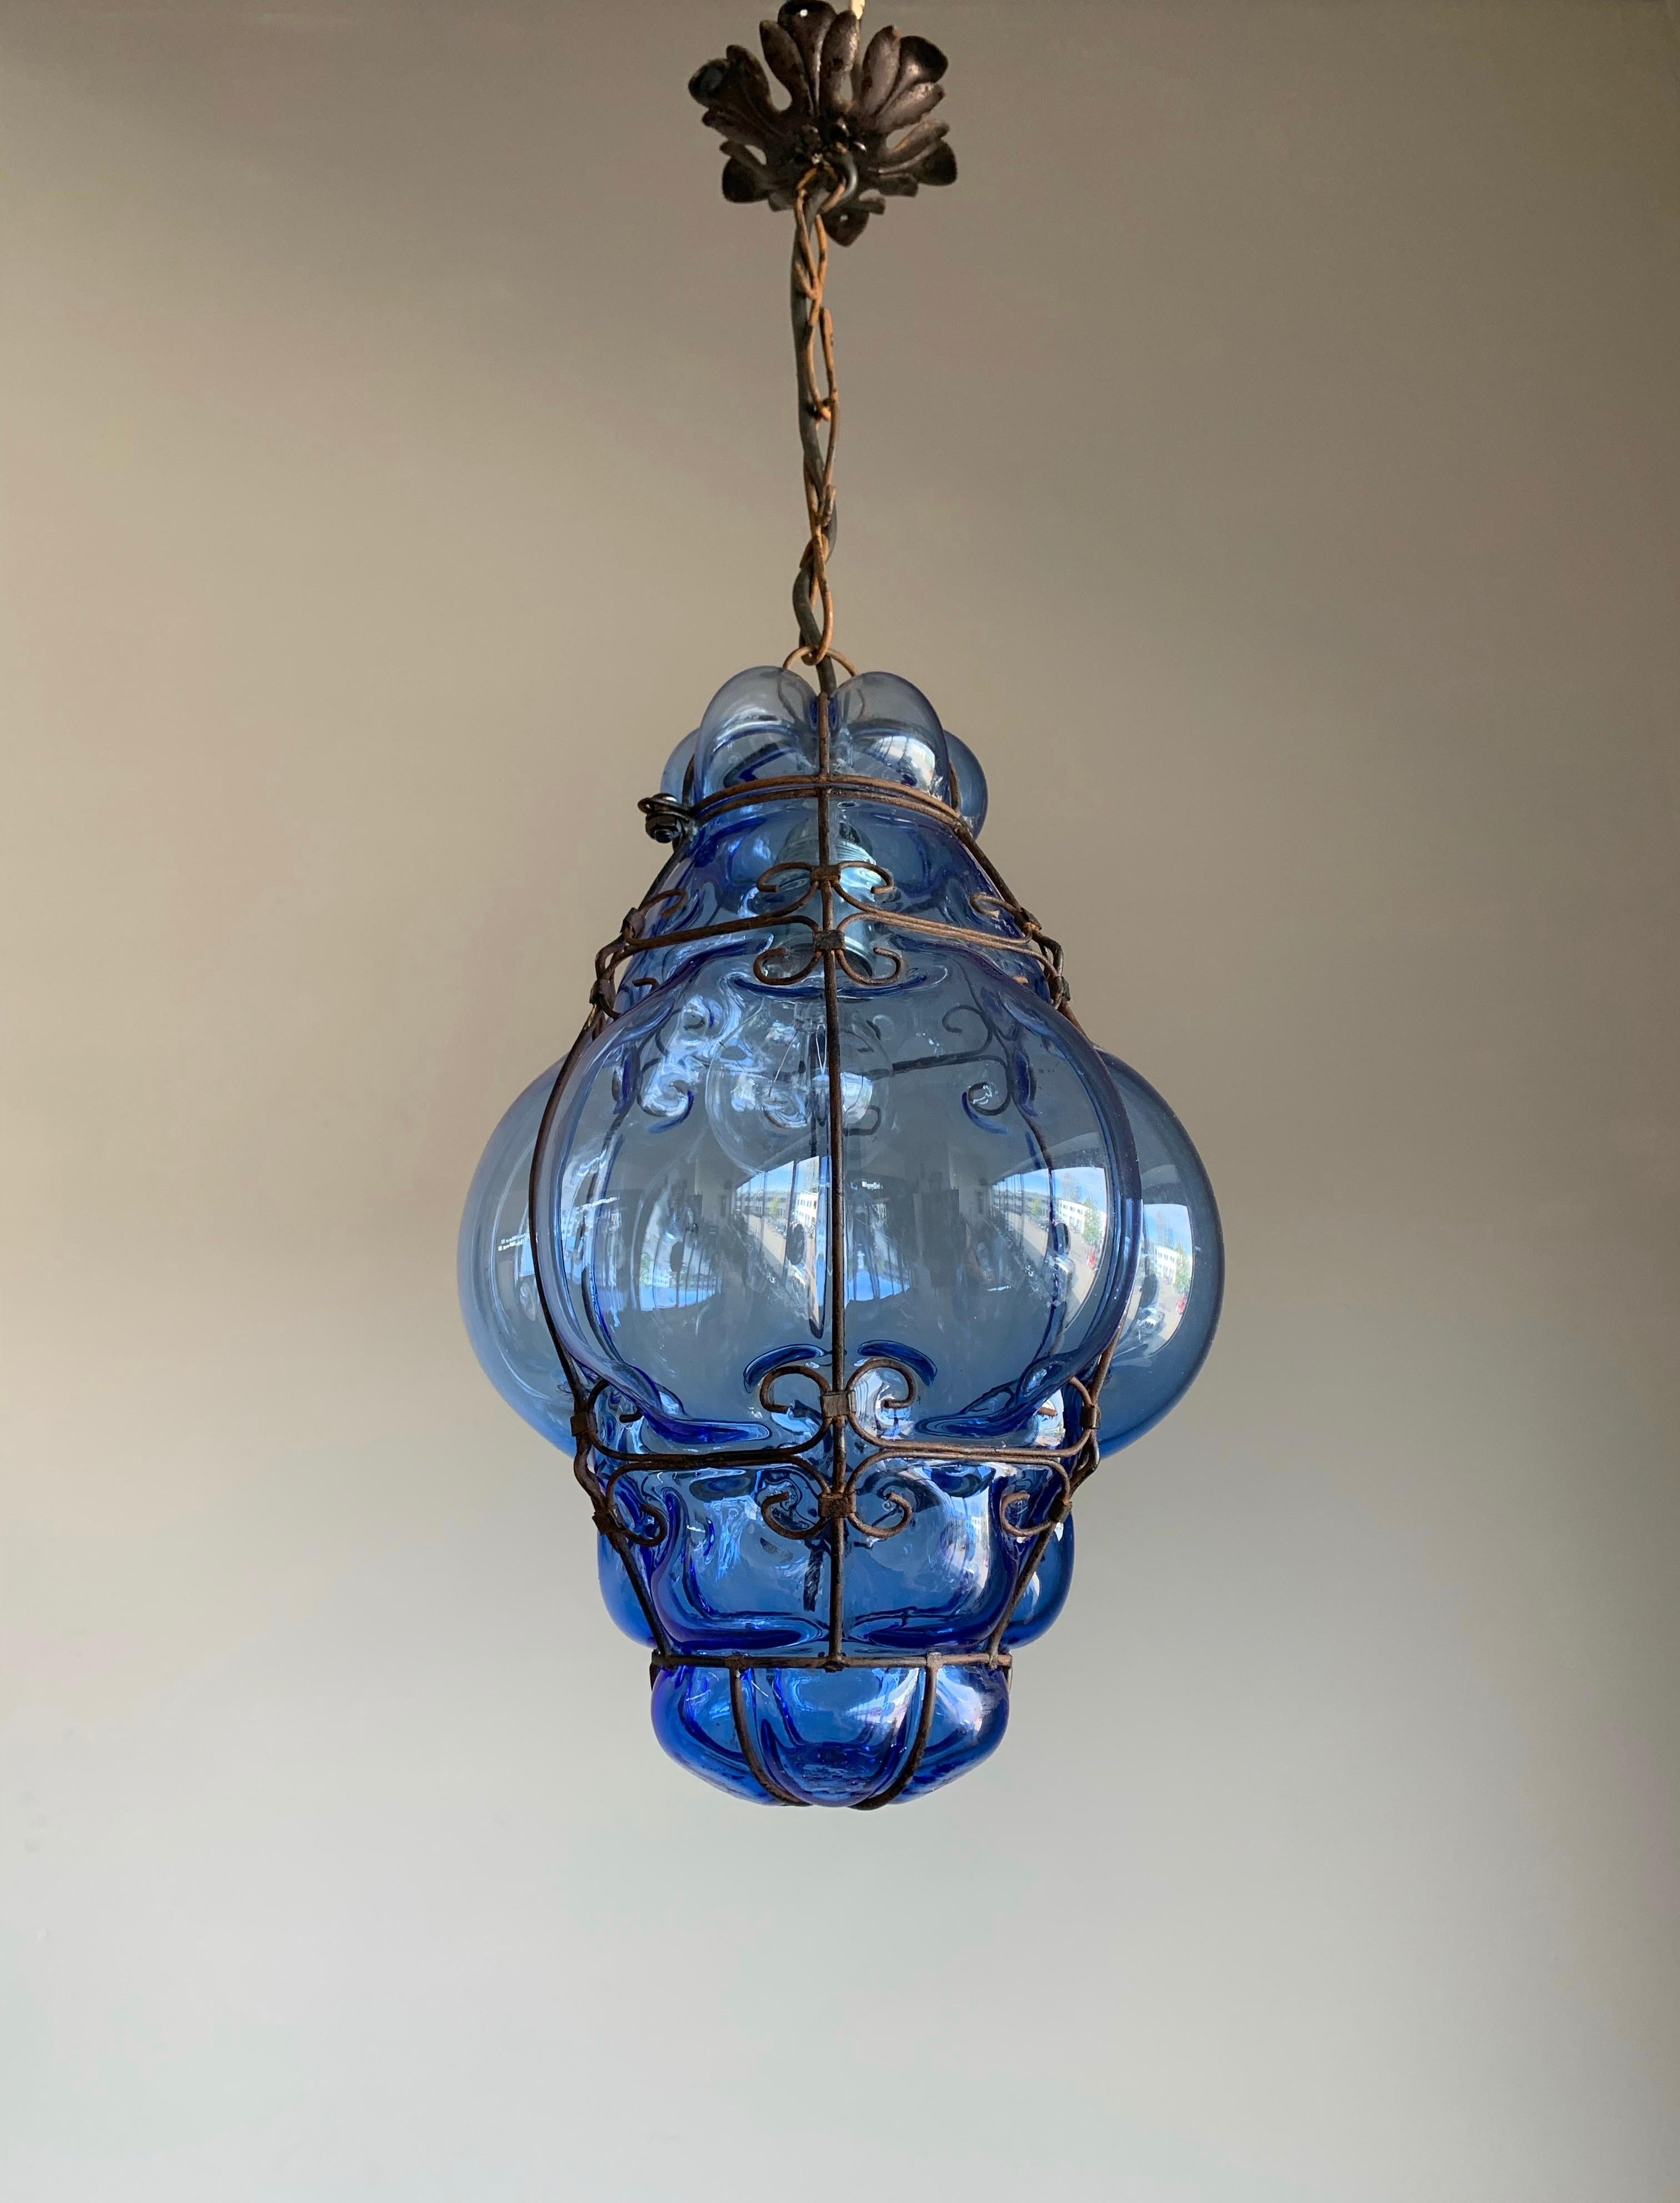 Beautiful color and practical size Italian fixture with mouth blown glass in a metal frame. 

If you are looking for a rare and stylish shape Murano light fixture to grace your home then this handmade antique specimen could be coming your way soon.